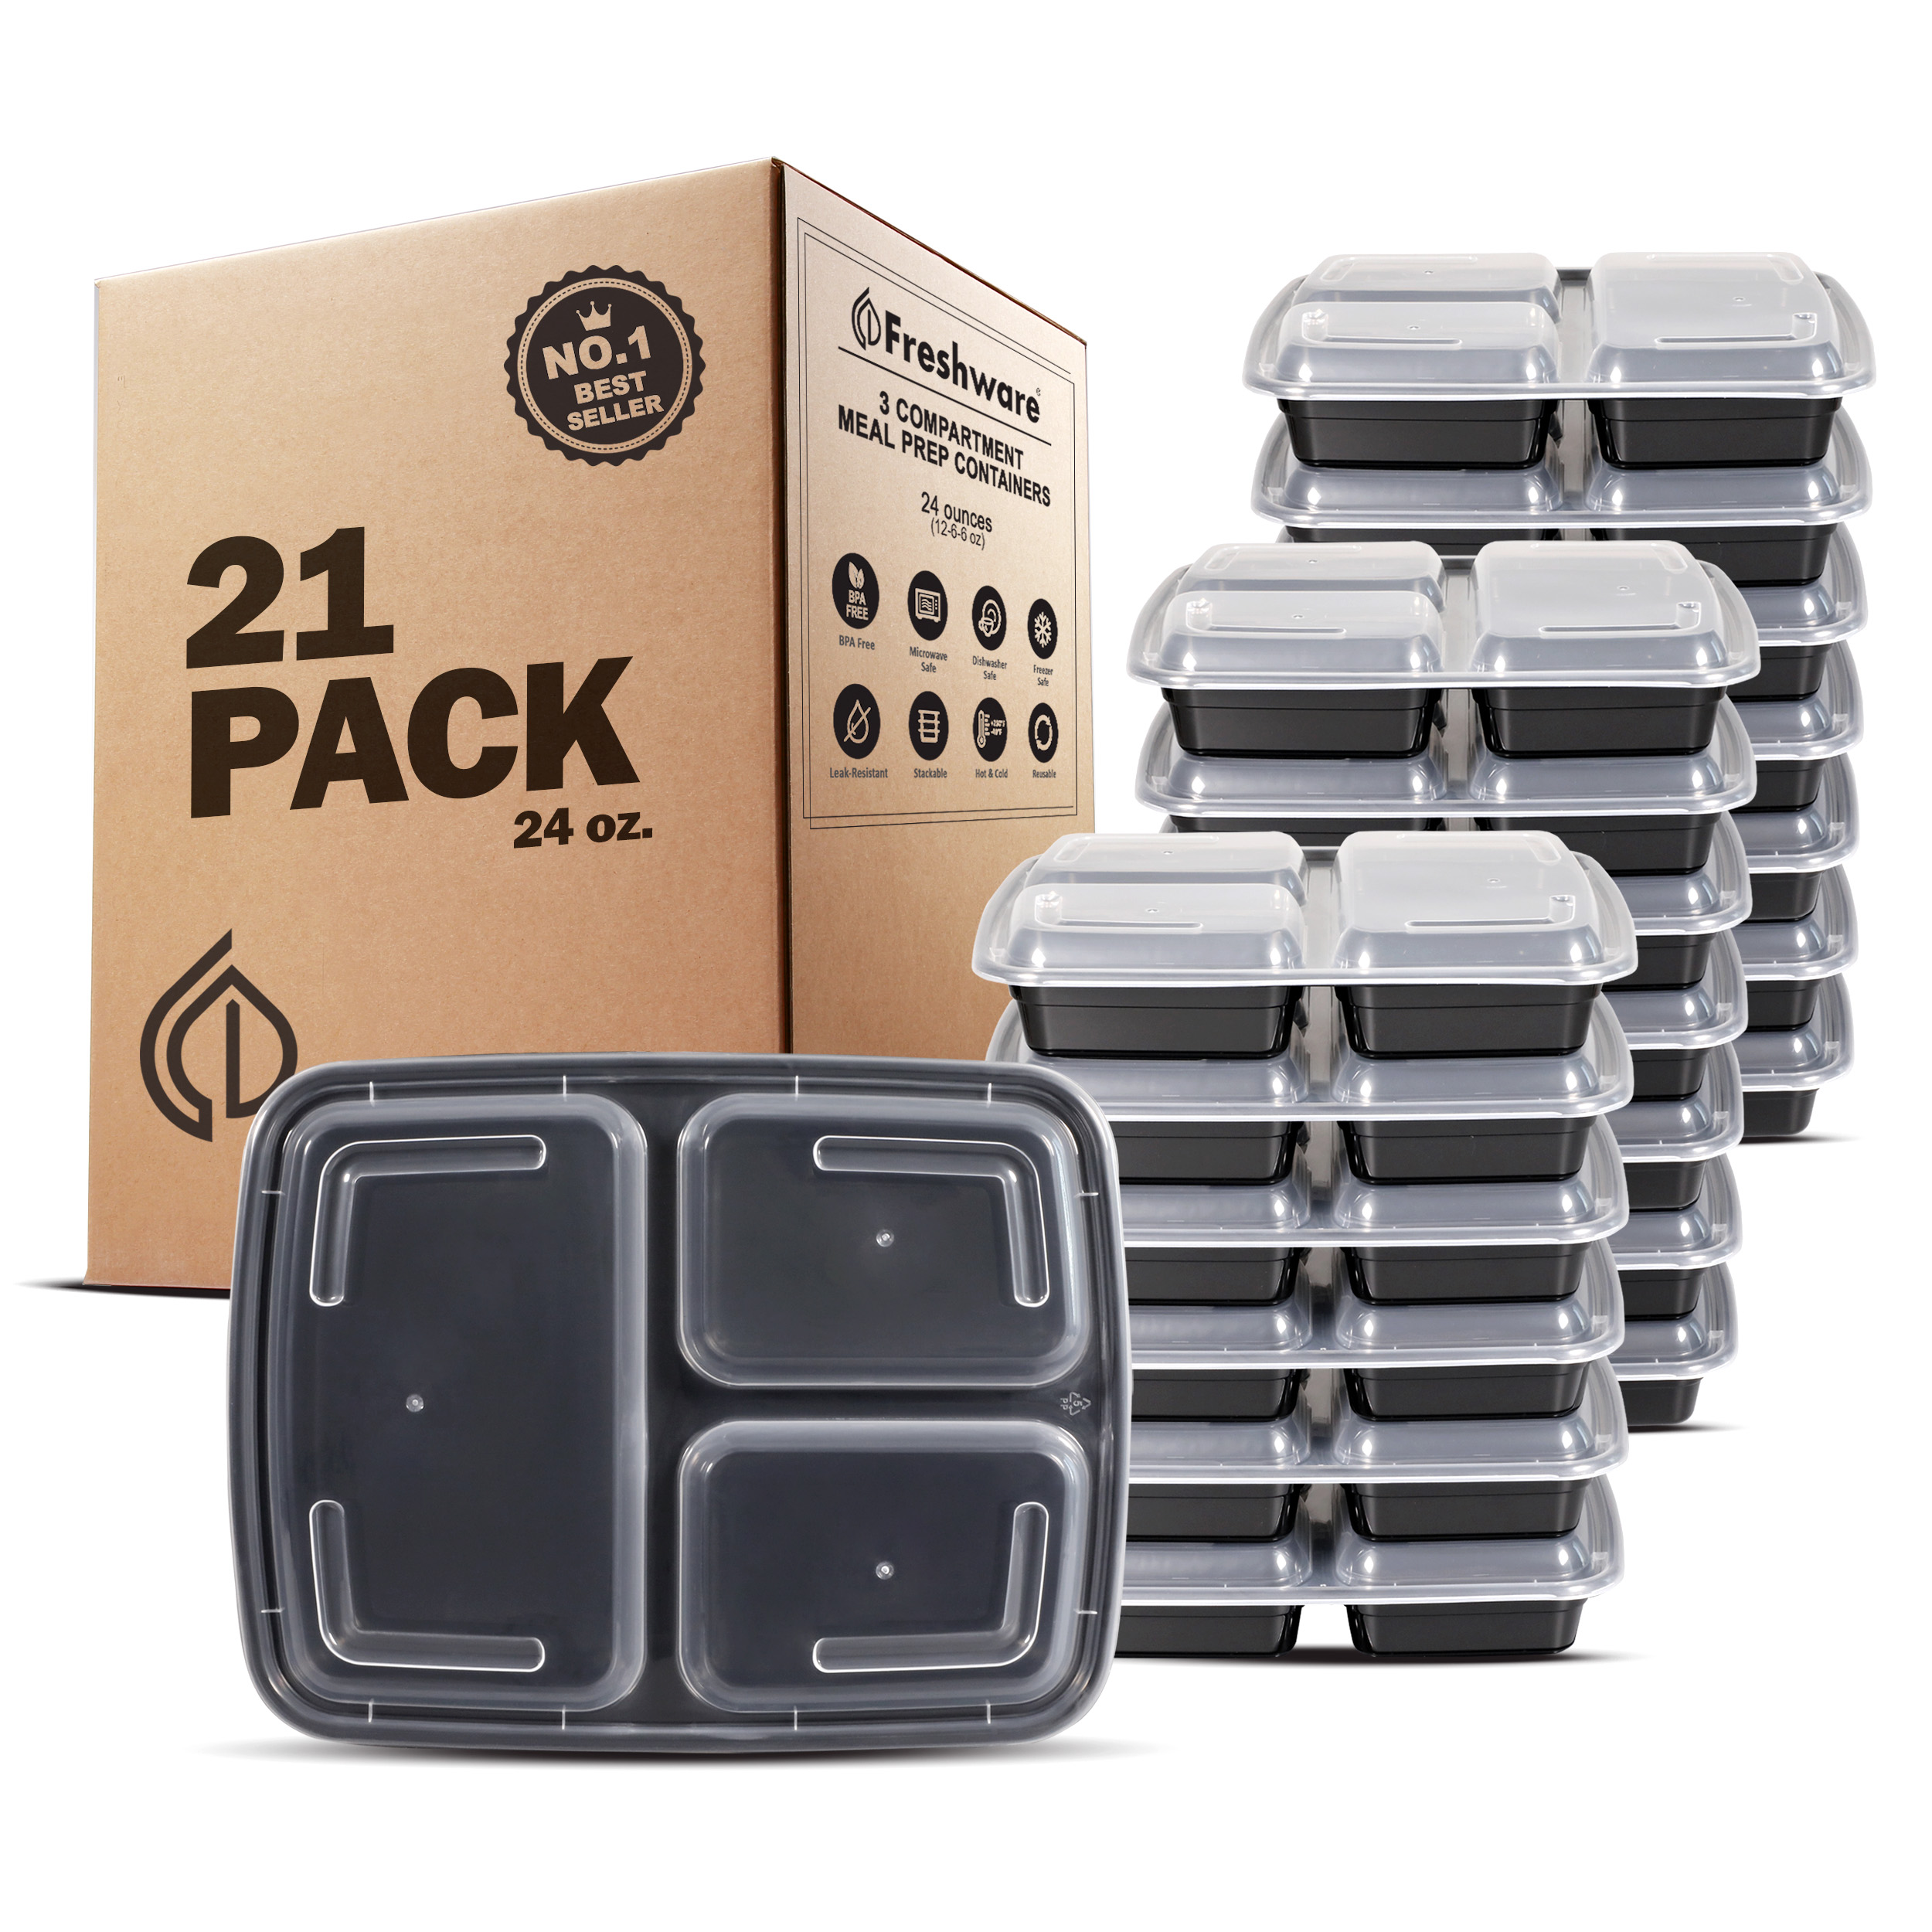 Freshware Meal Prep Containers 3 Compartments with Lids, Set of 21 - image 1 of 6